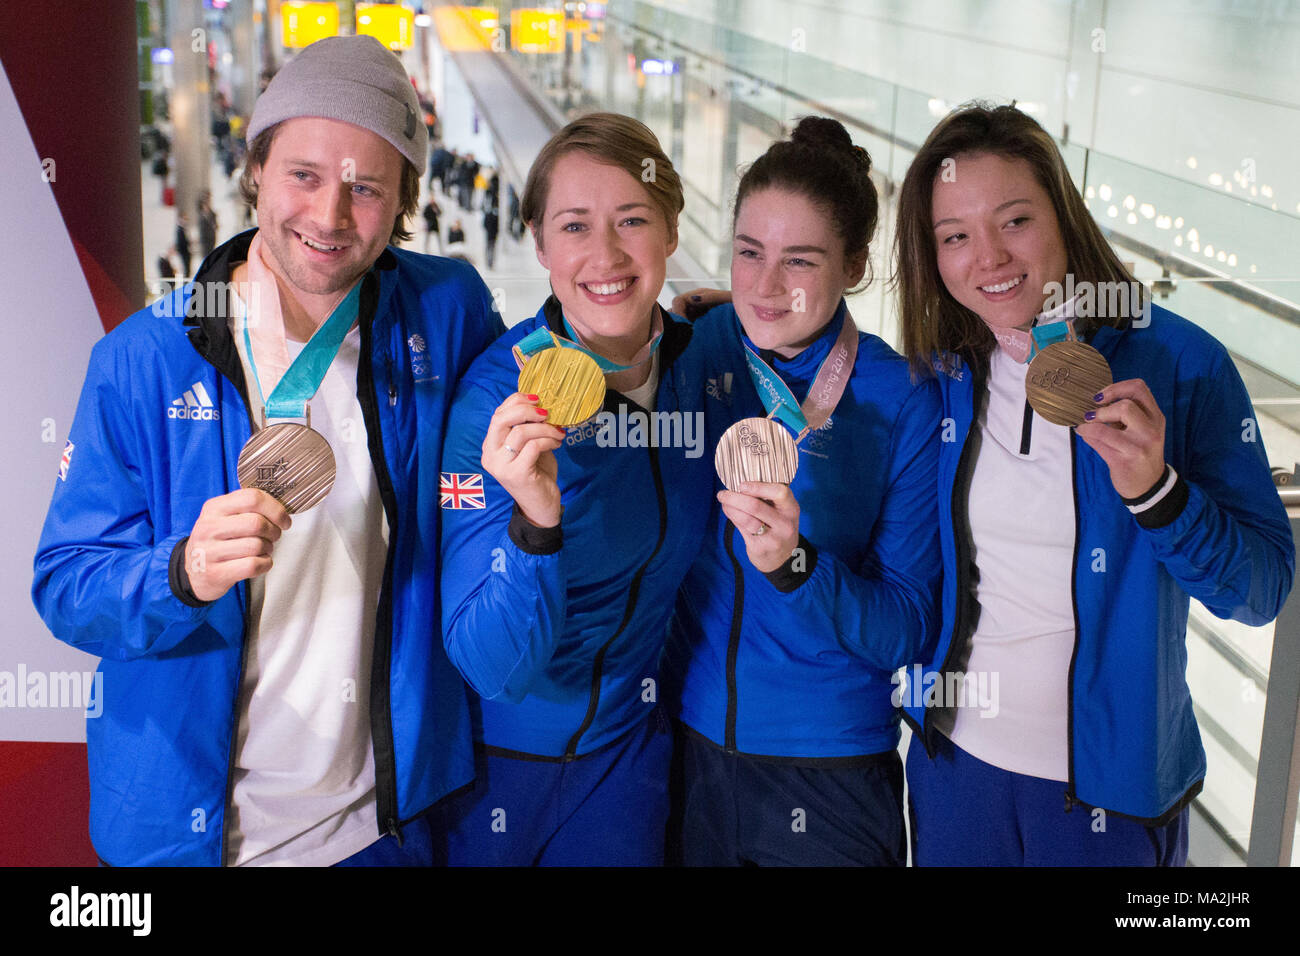 The British Olympic Association (BOA) welcome athletes home from the PyeongChang 2018 Olympic Winter Games in Korea.  Featuring: Billy Morgan, Lizzy Yarnold, Laura Deas, Izzy Atkin Where: London, England, United Kingdom When: 26 Feb 2018 Credit: Wheatley/WENN Stock Photo